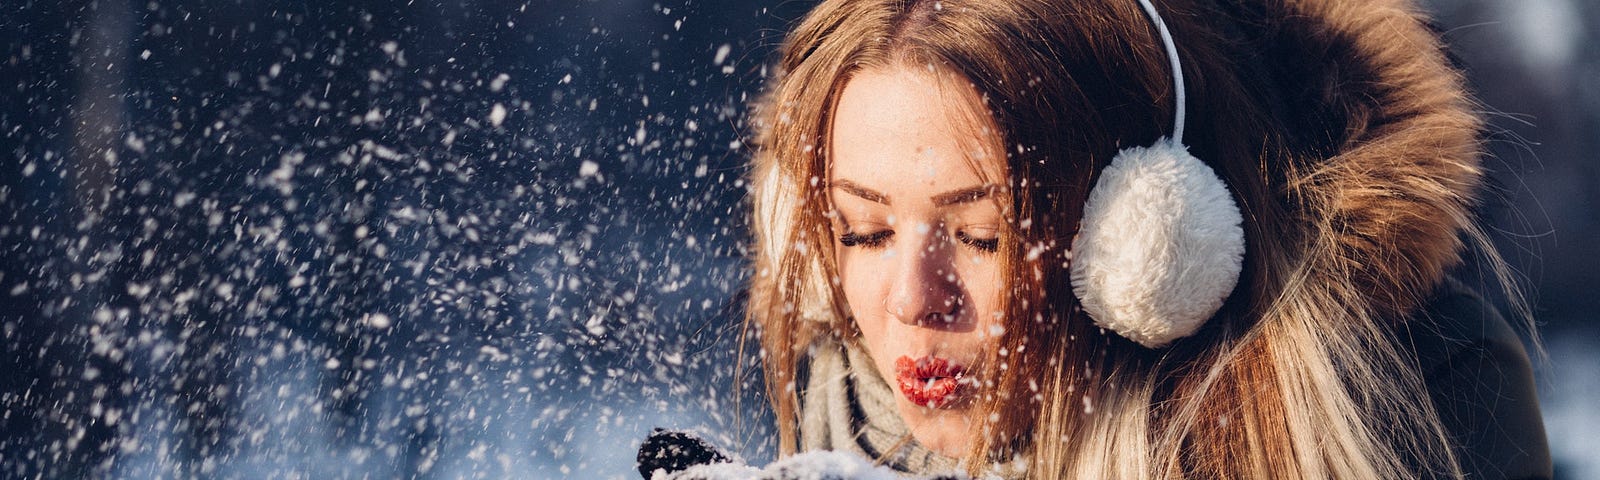 Woman blowing snow from hand